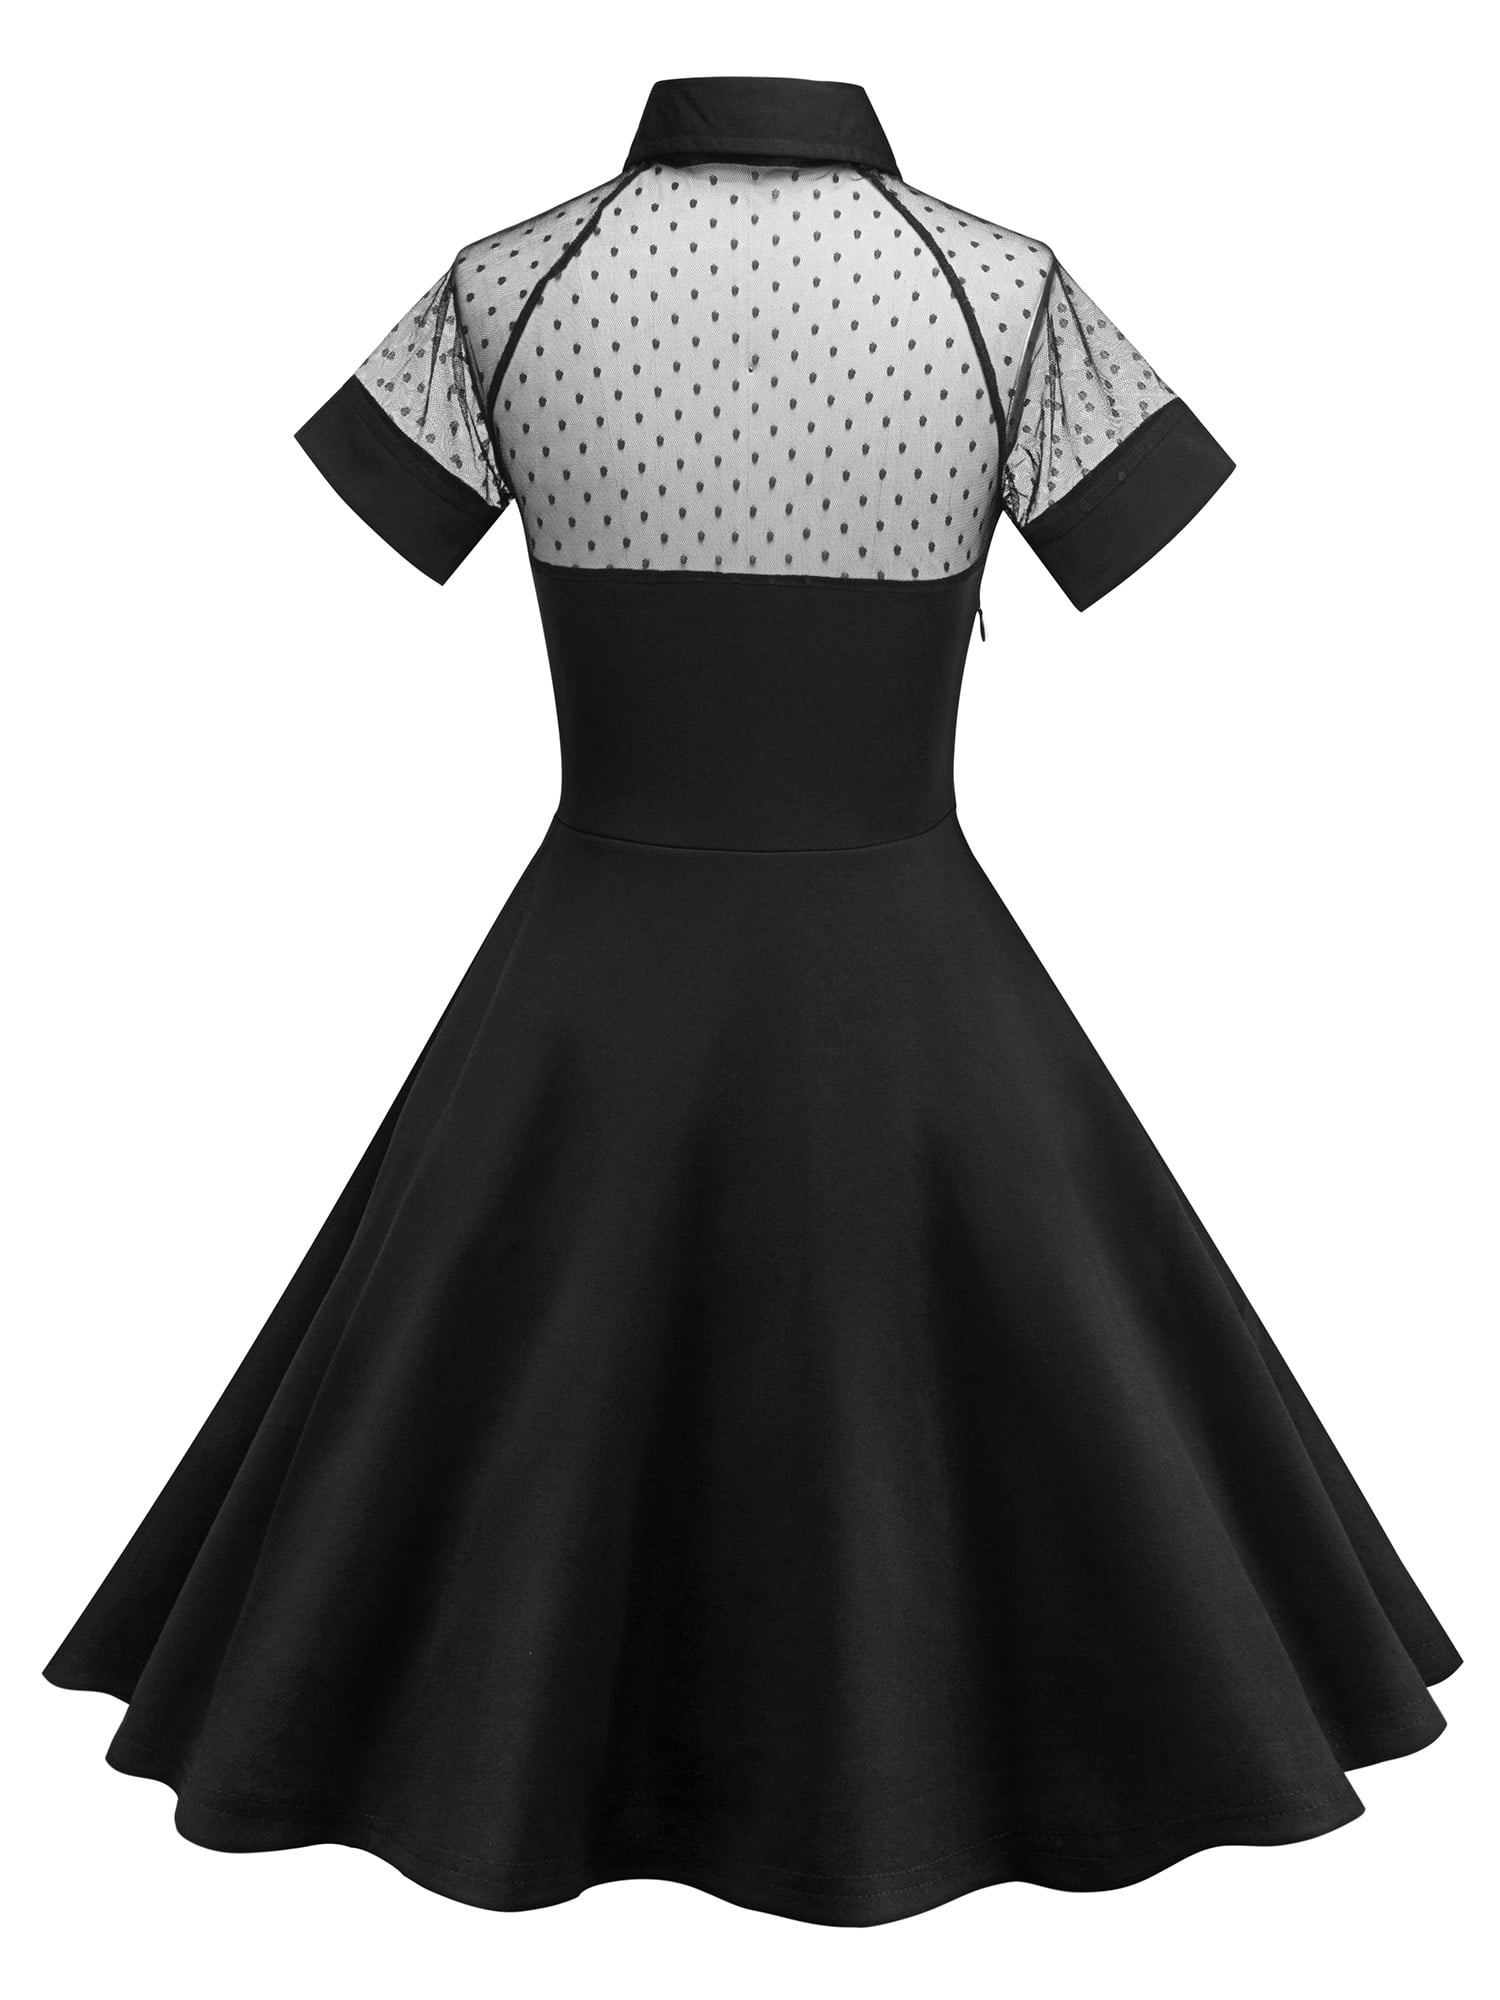 Sexydance Women Vintage 50 60s Rockabilly Pinup Housewife Party